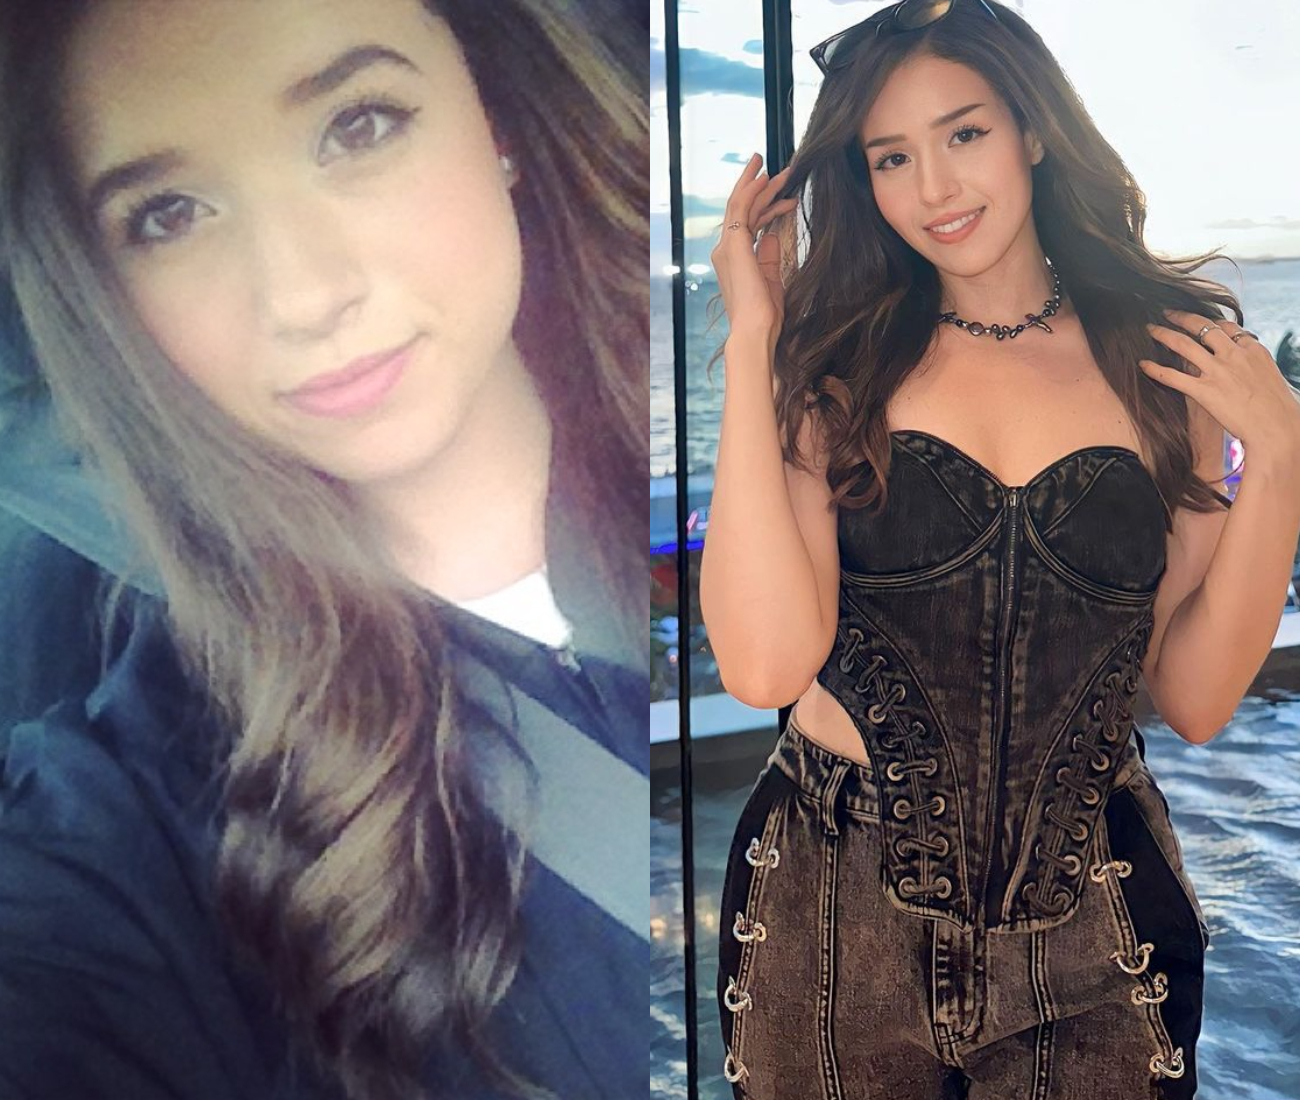 Pokimane before and after her alleged plastic surgery